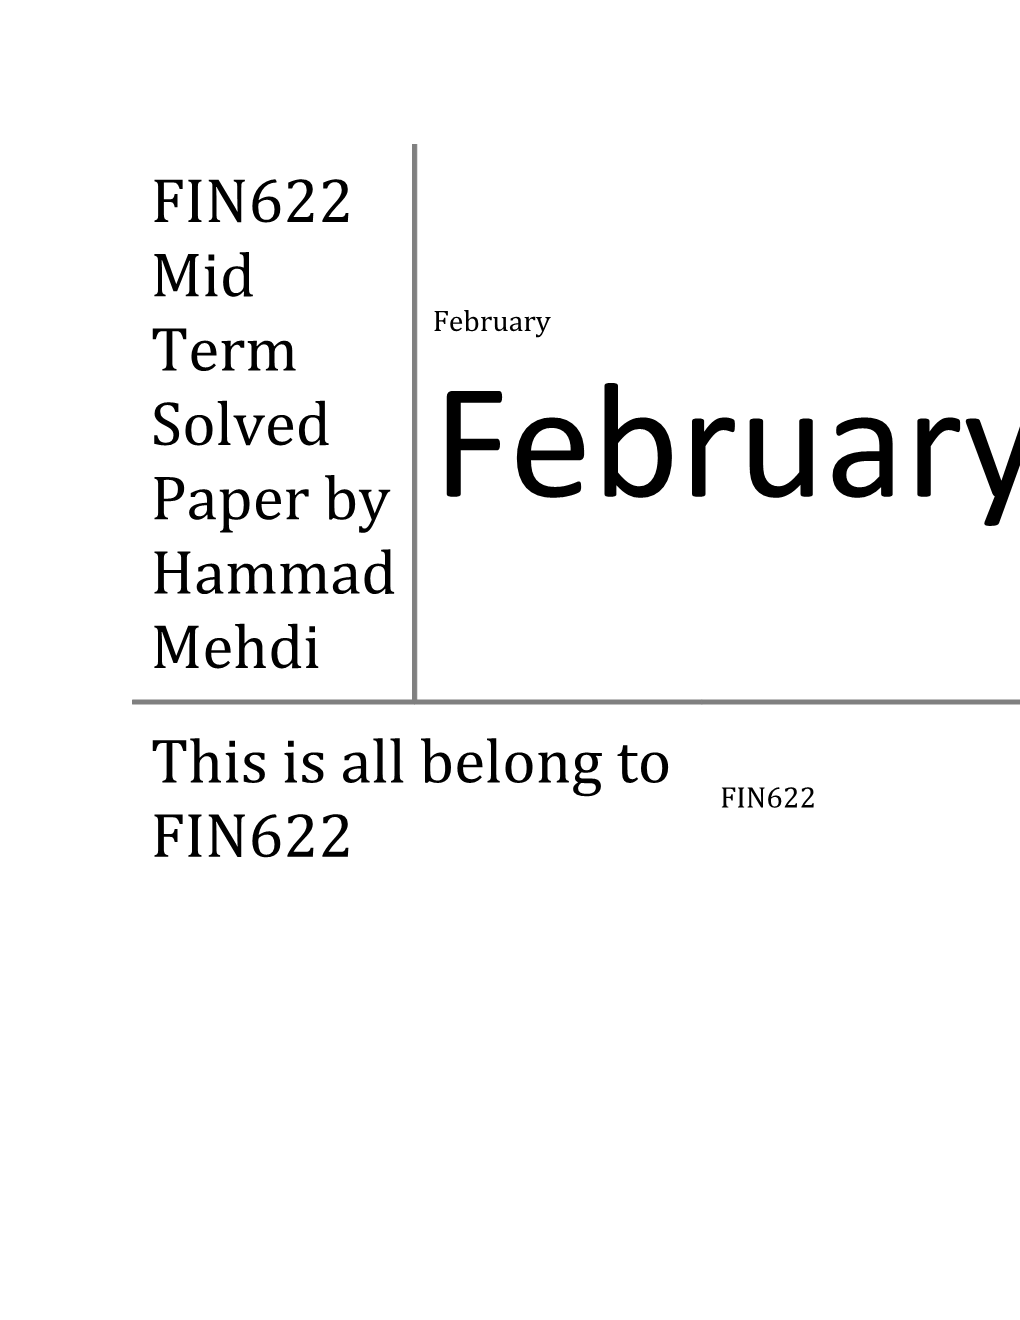 FIN622 Mid Term Solved Paper by Hammad Mehdi